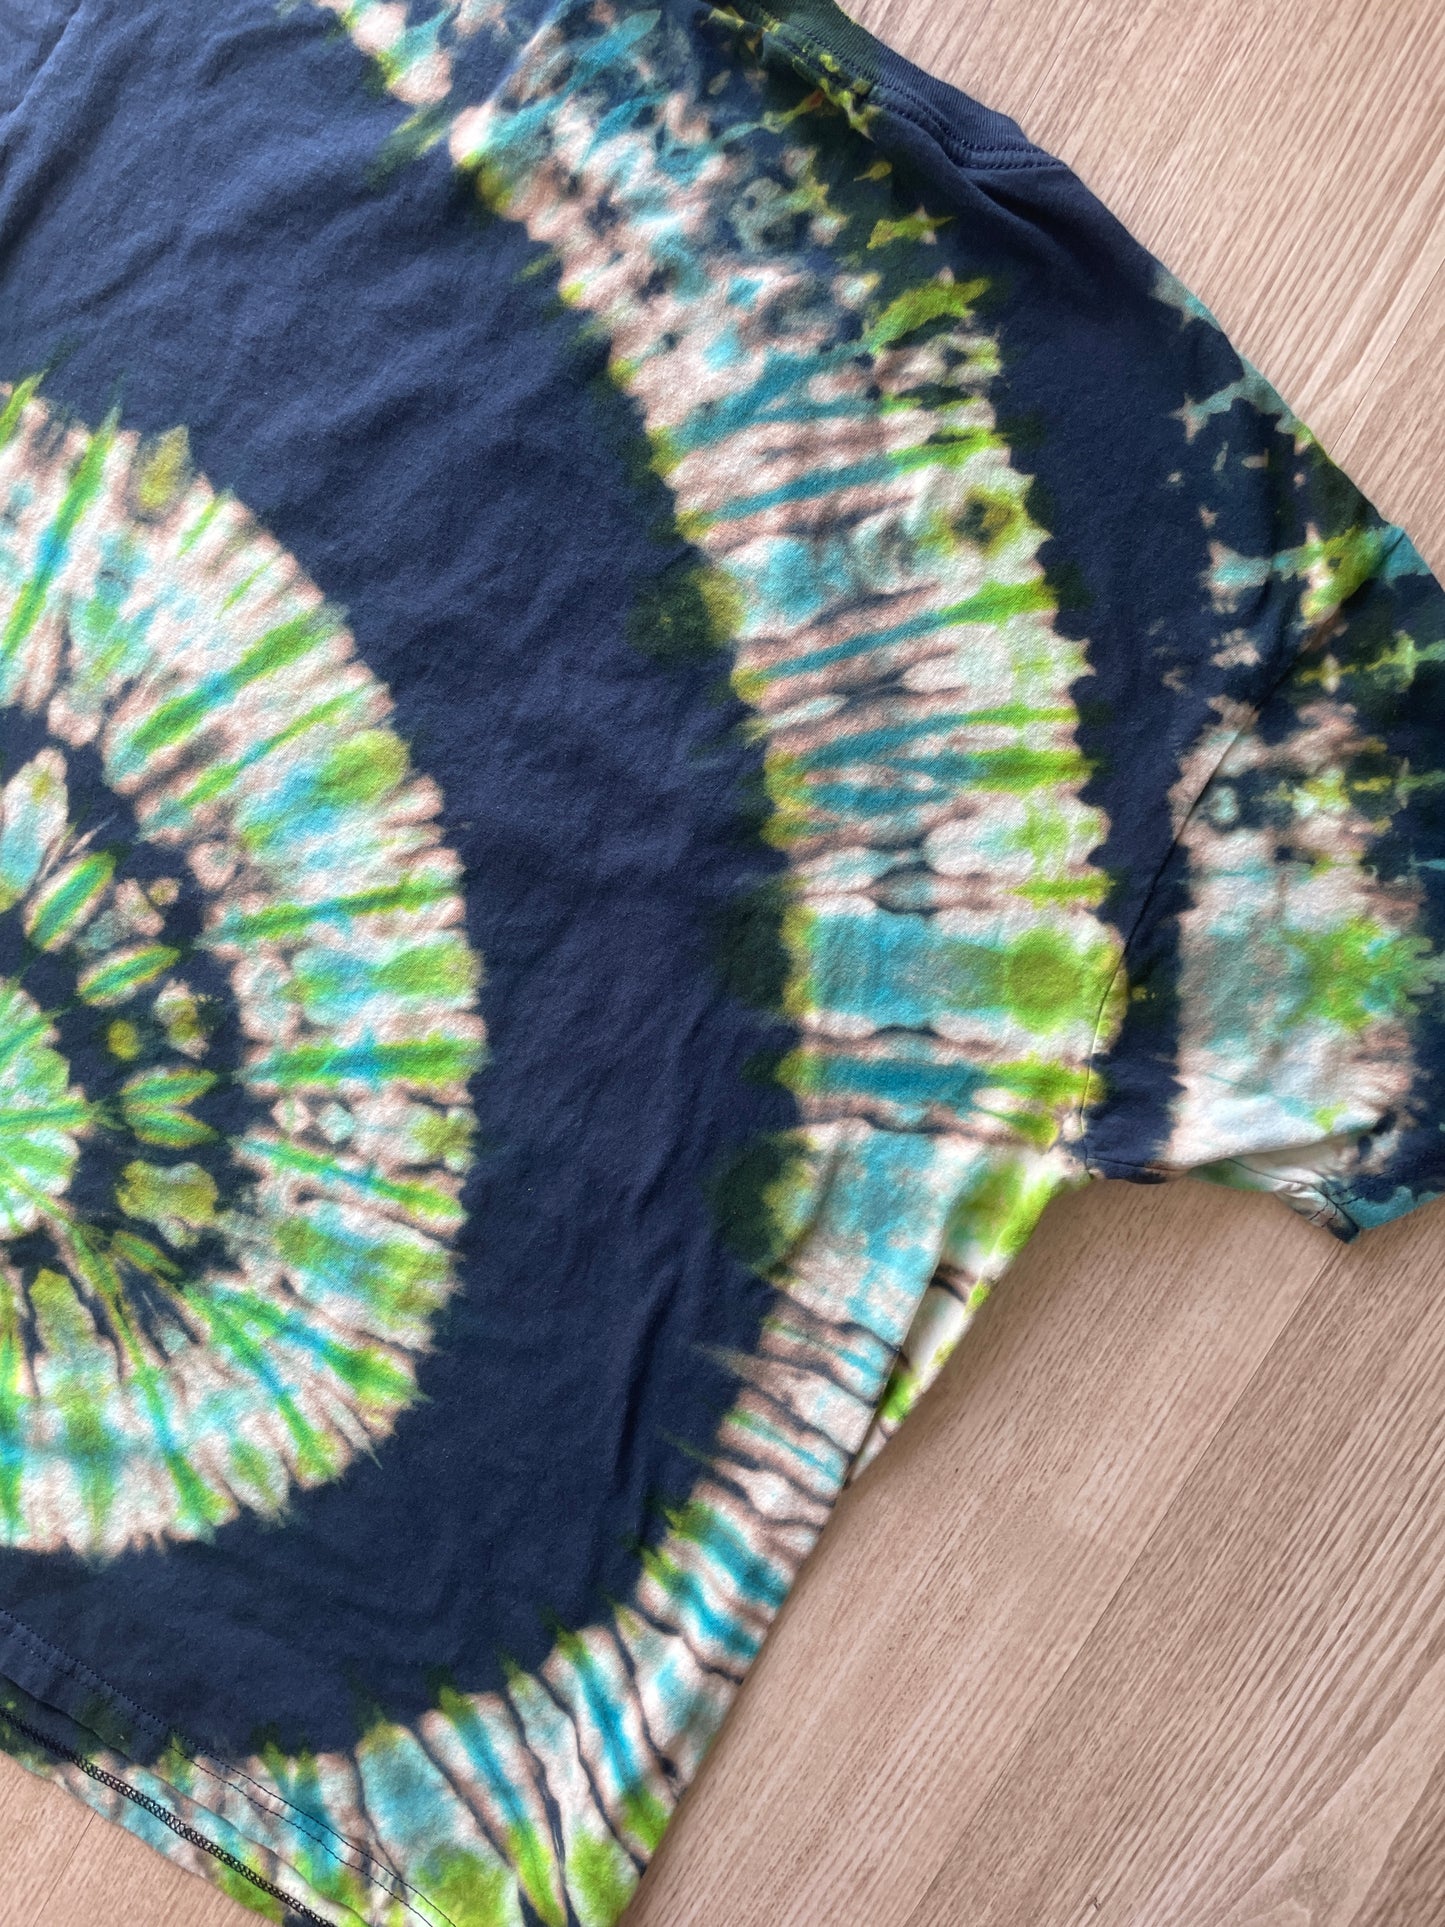 XL Men’s Rick and Morty Handmade Tie Dye T-Shirt | One-Of-a-Kind Blue and Green Spiral Short Sleeve